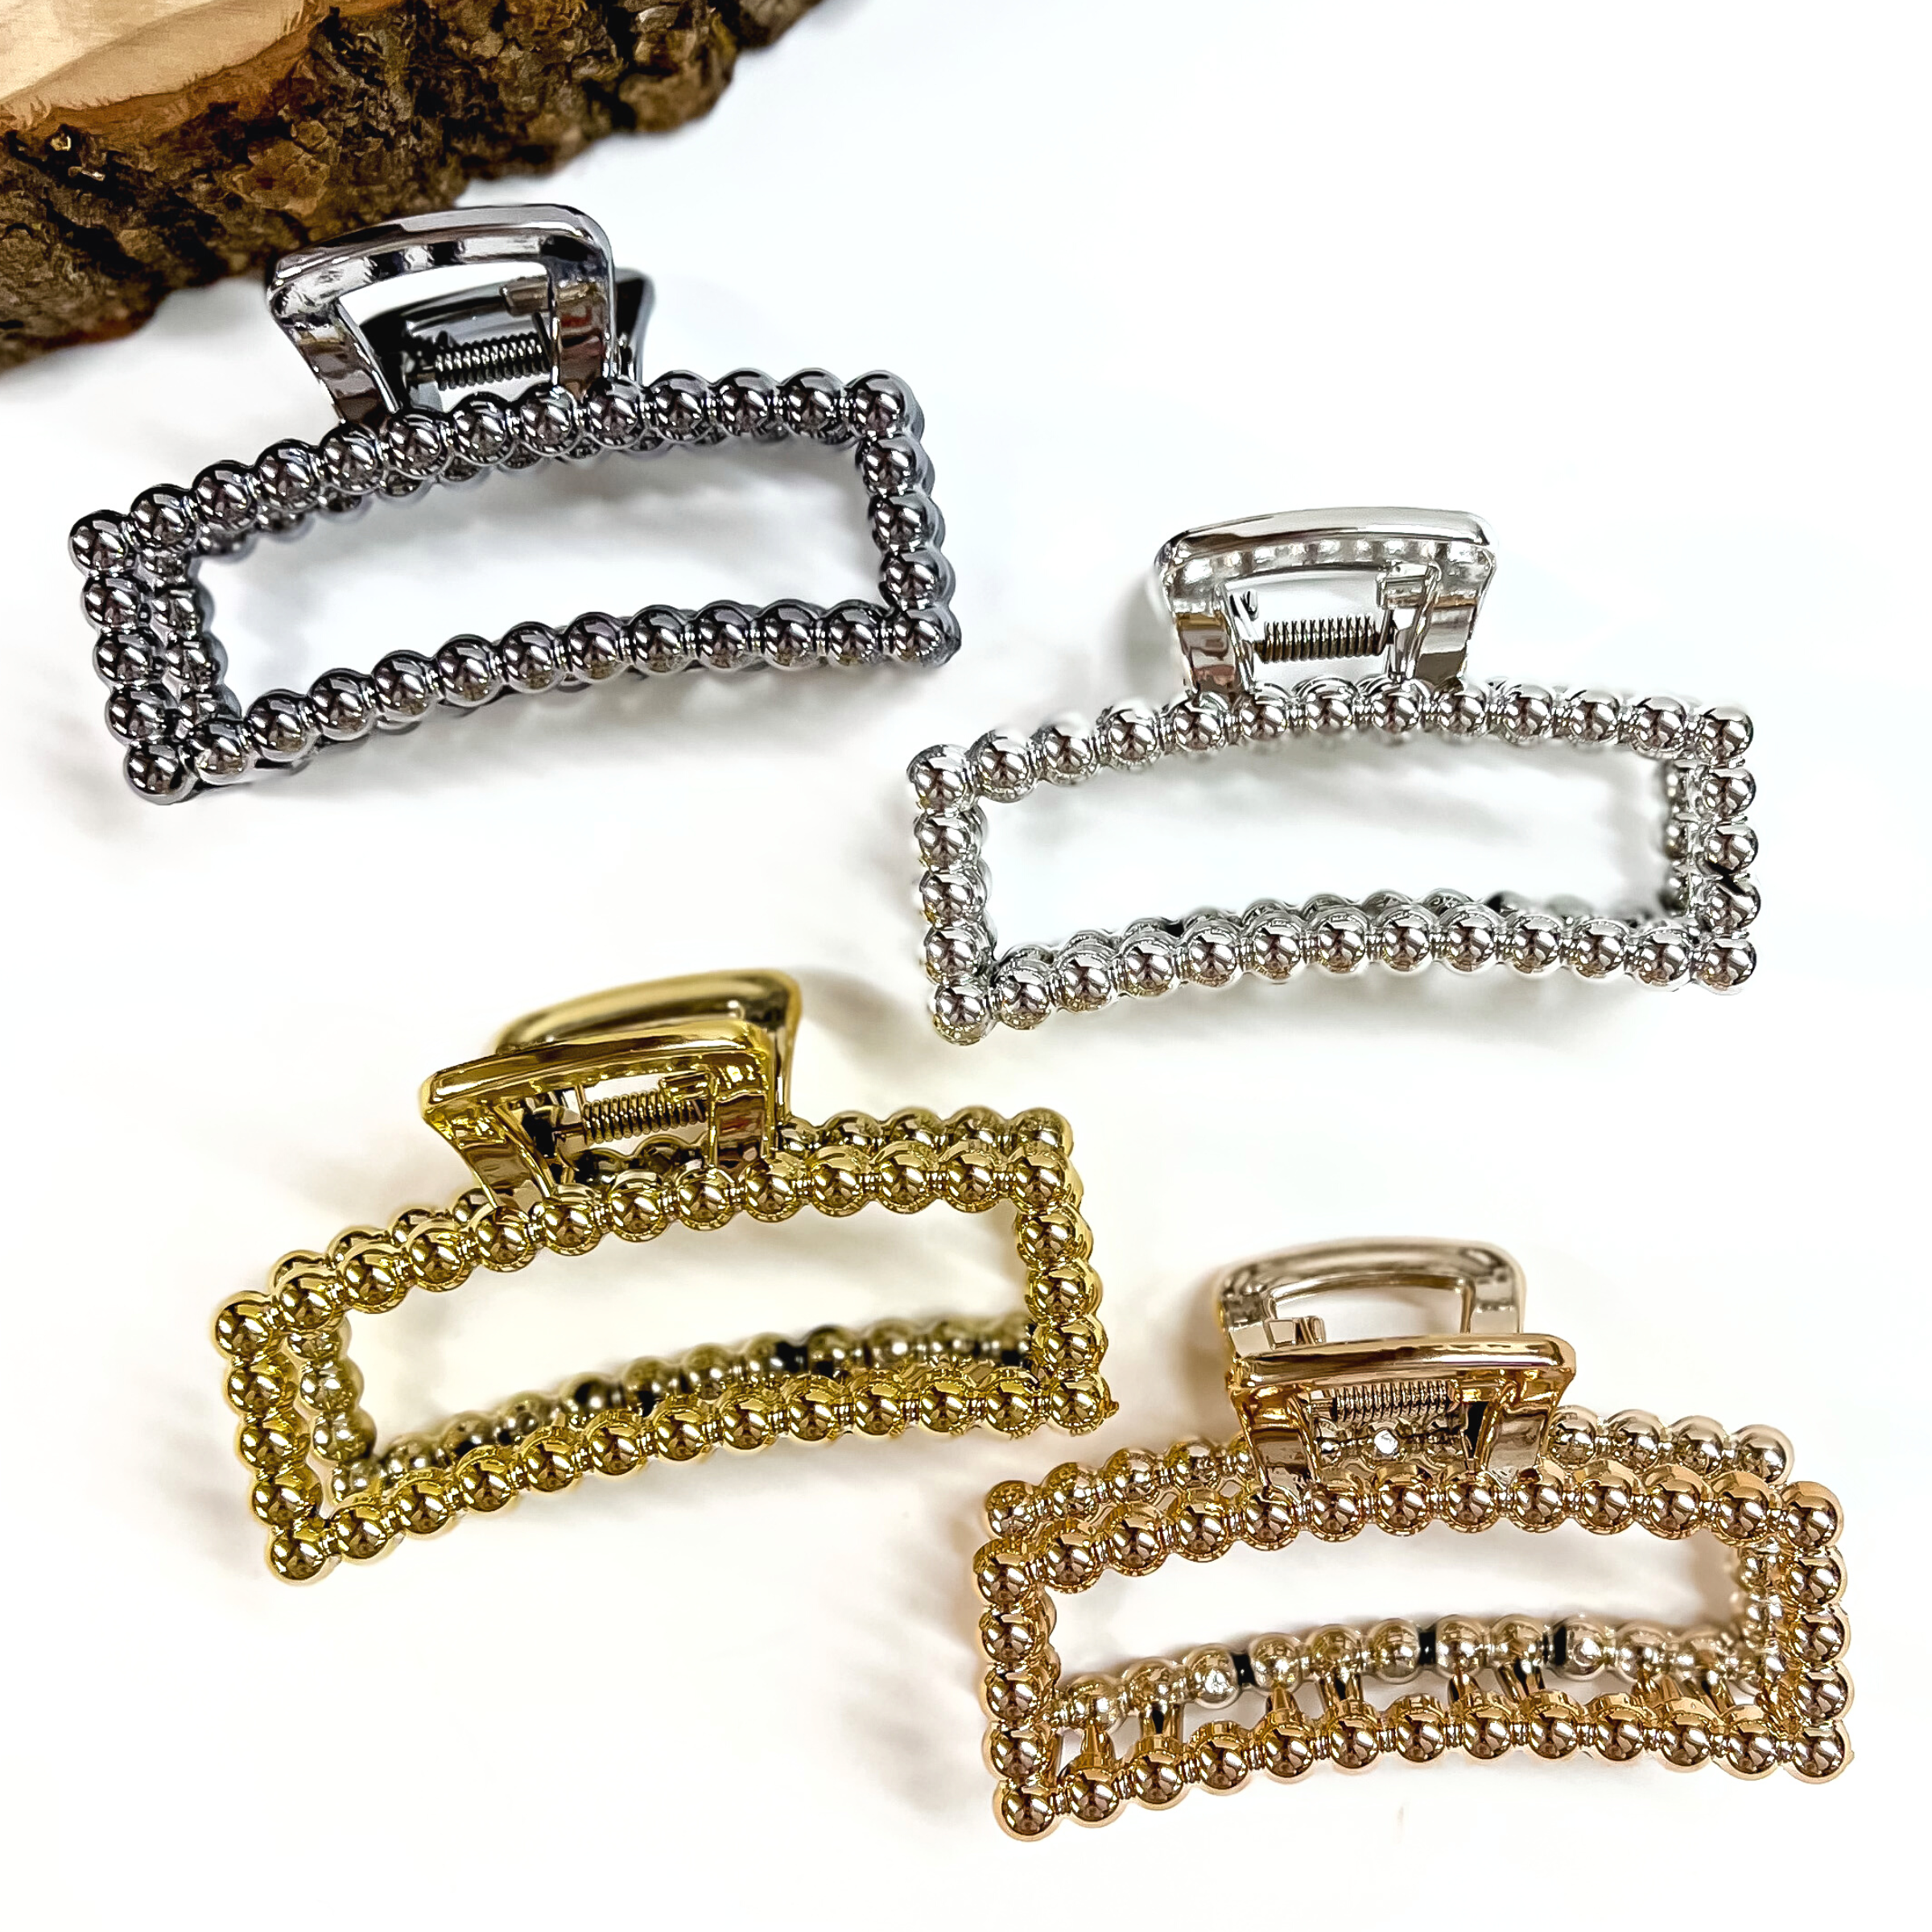 There are four rectangle metallic clips in different colors, all clips have a beaded texture all over them. There is gunmetal, silver, gold, and copper. These clips are laying on a white background with a slab of wood in the top as decor.